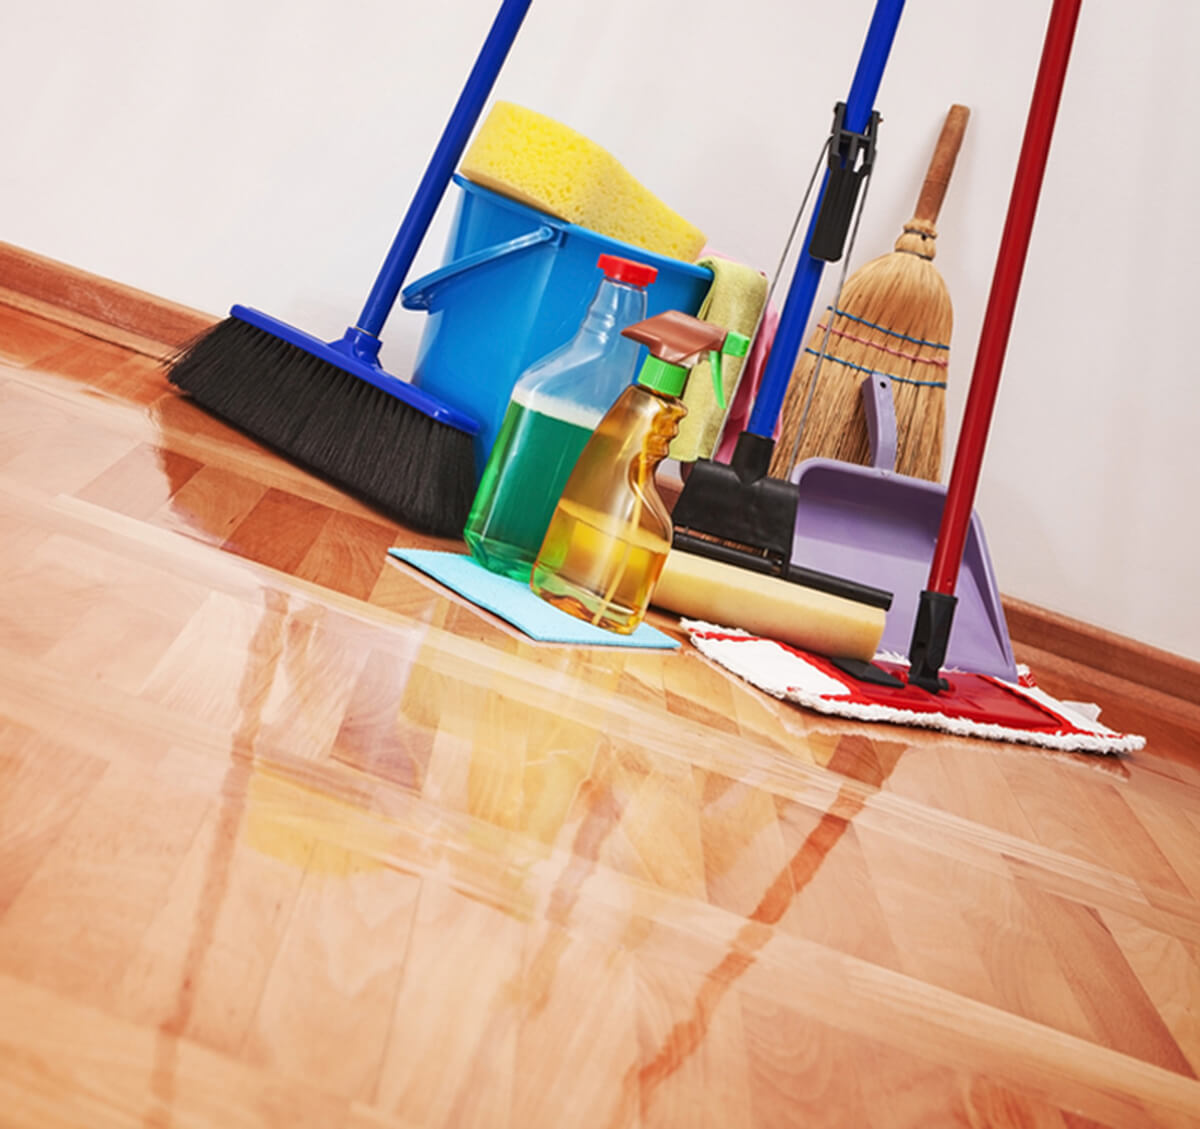 Post-construction janitorial cleaning supplies